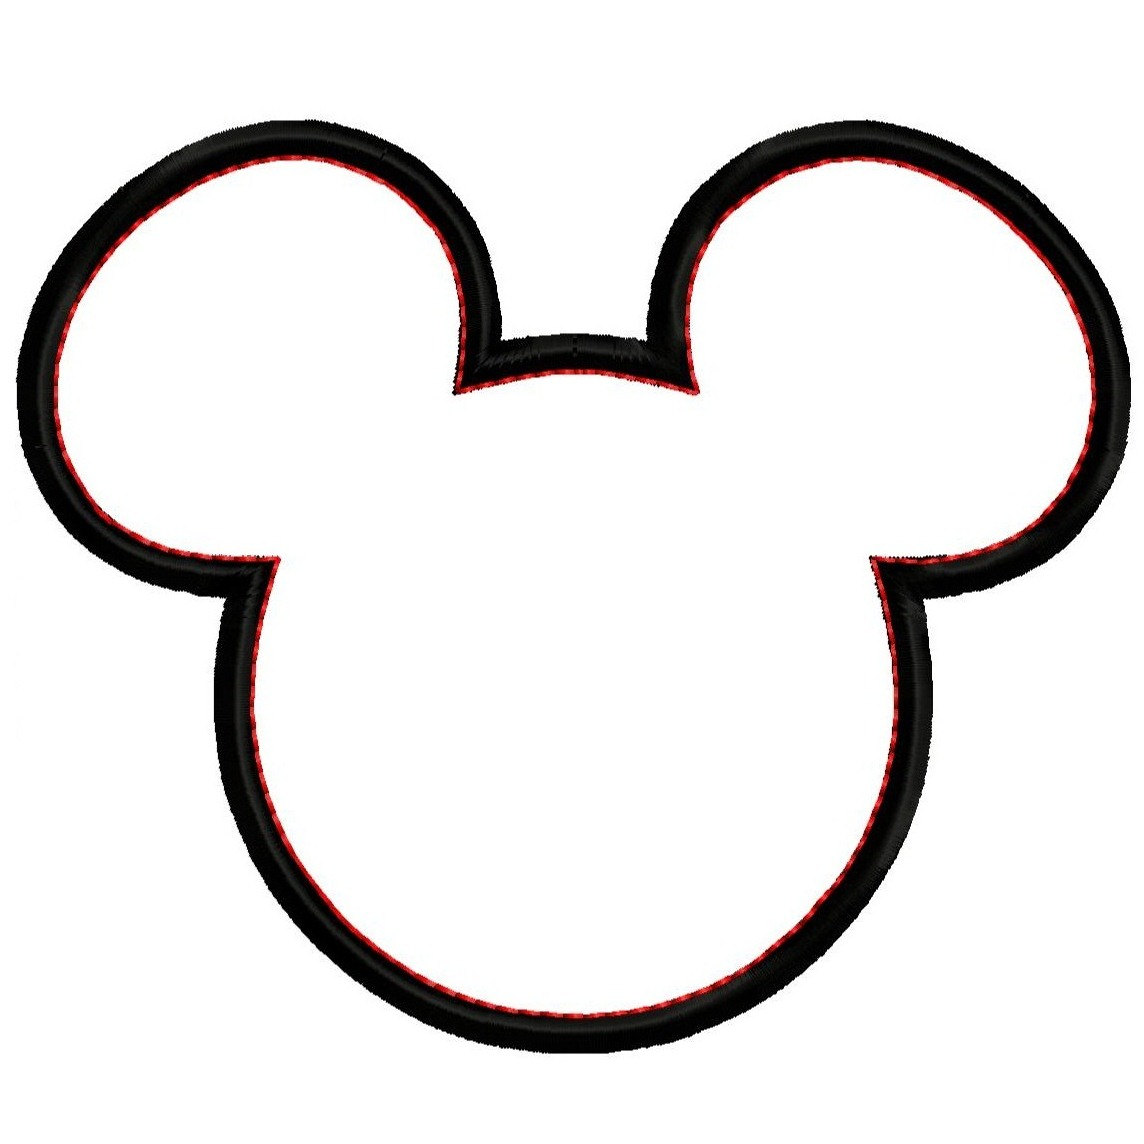 Free Mickey Head Silhouette Download Free Mickey Head Silhouette Png Images Free Cliparts On Clipart Library